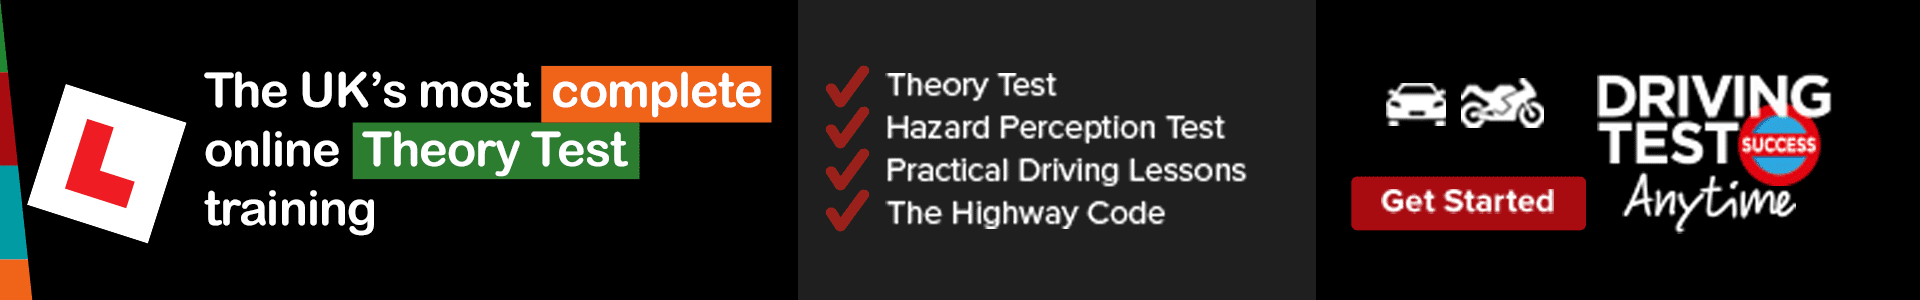 Driving Test Success Theory Test Resources